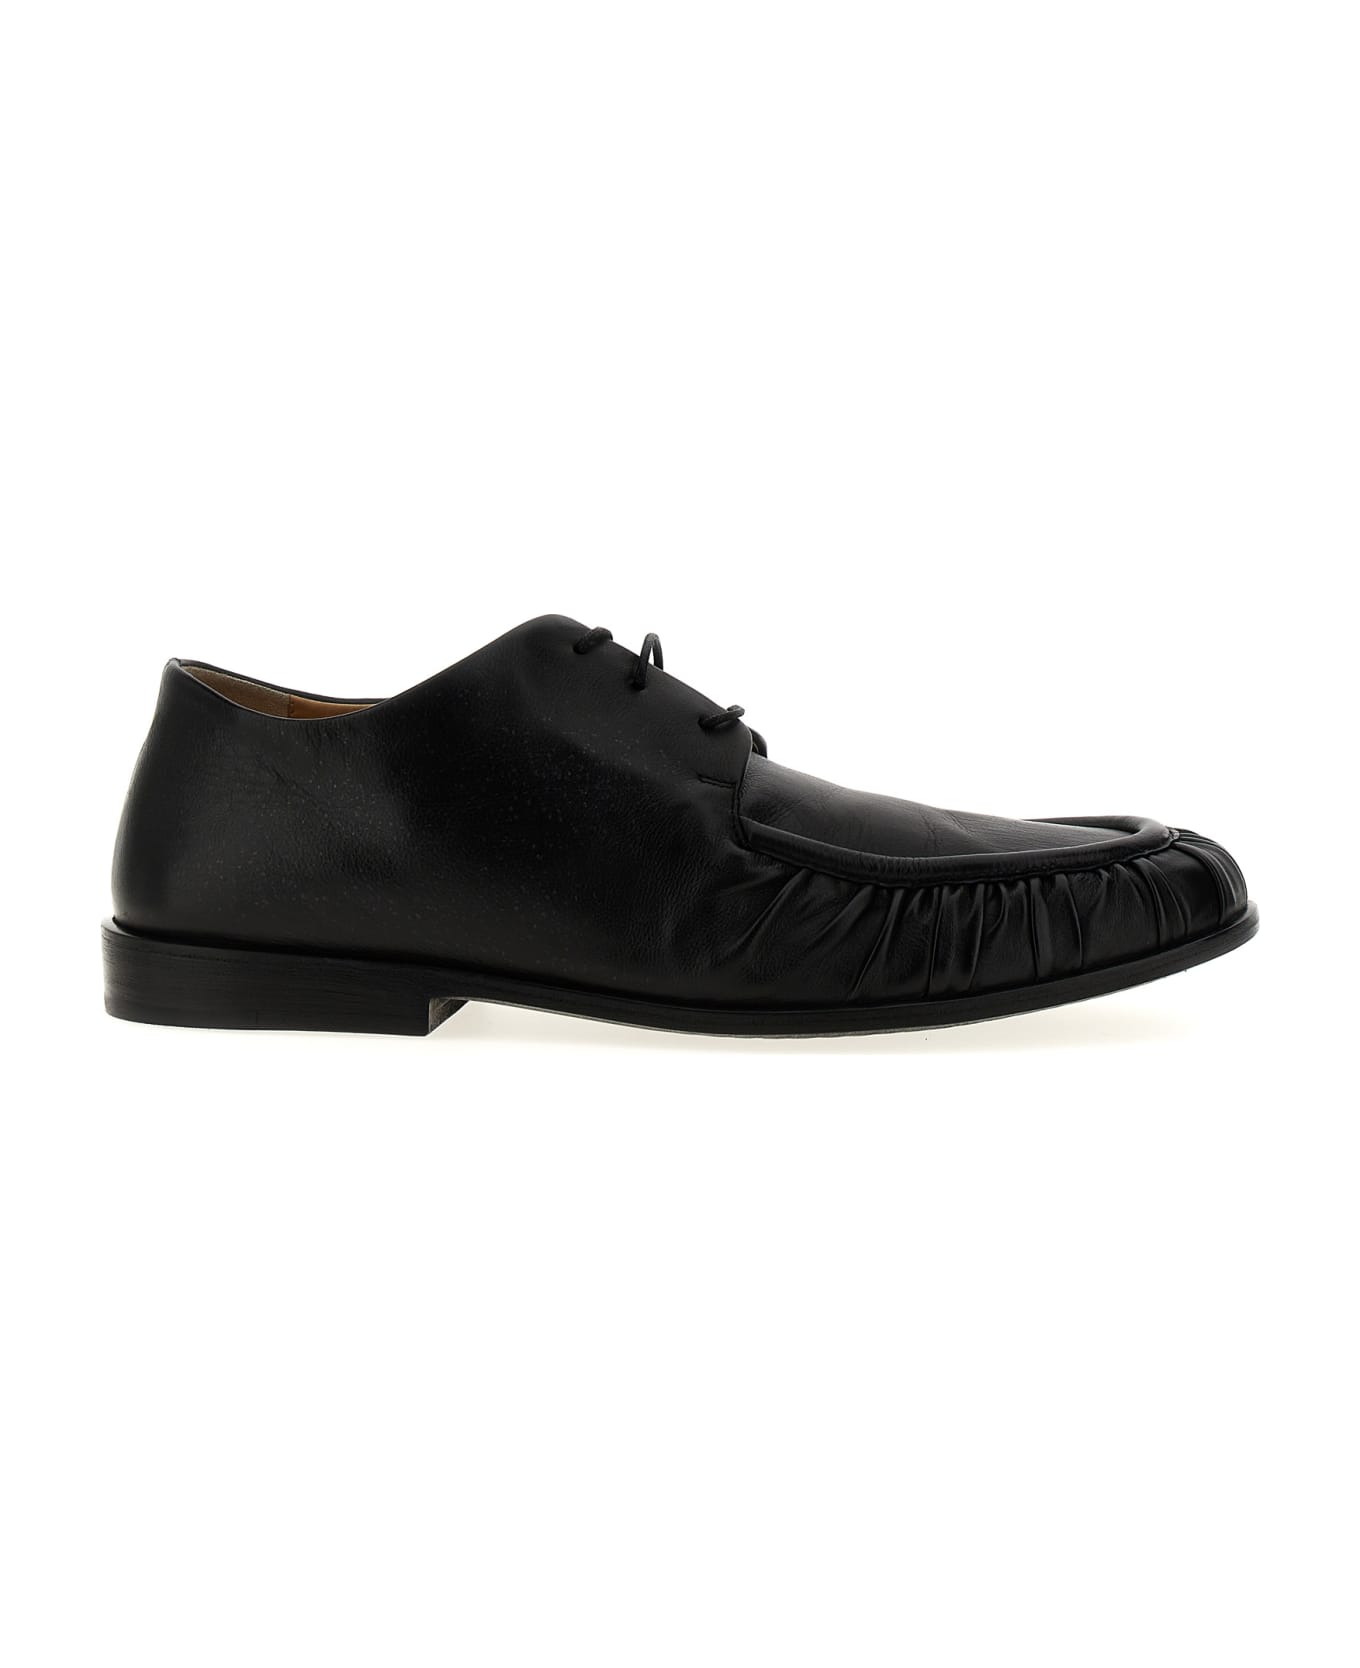 Marsell 'mocassino' Lace Up Shoes - Black  